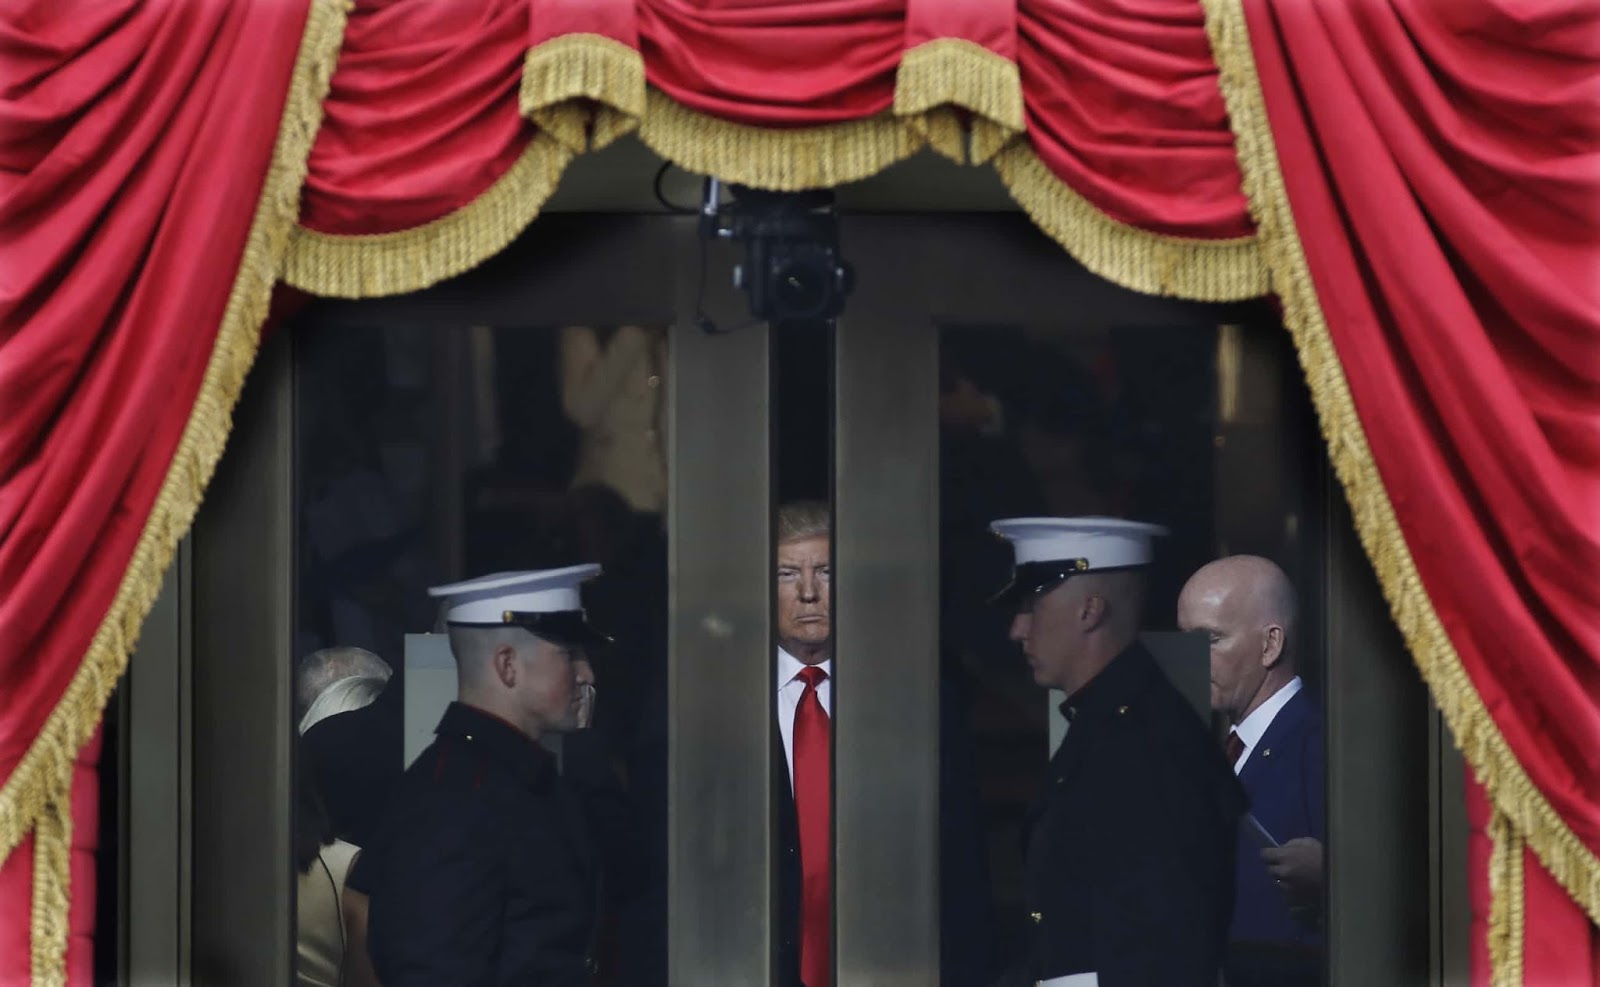 25 Of The Most Intriguing Pictures Of 2017 - Donald Trump waits to step out for his inauguration